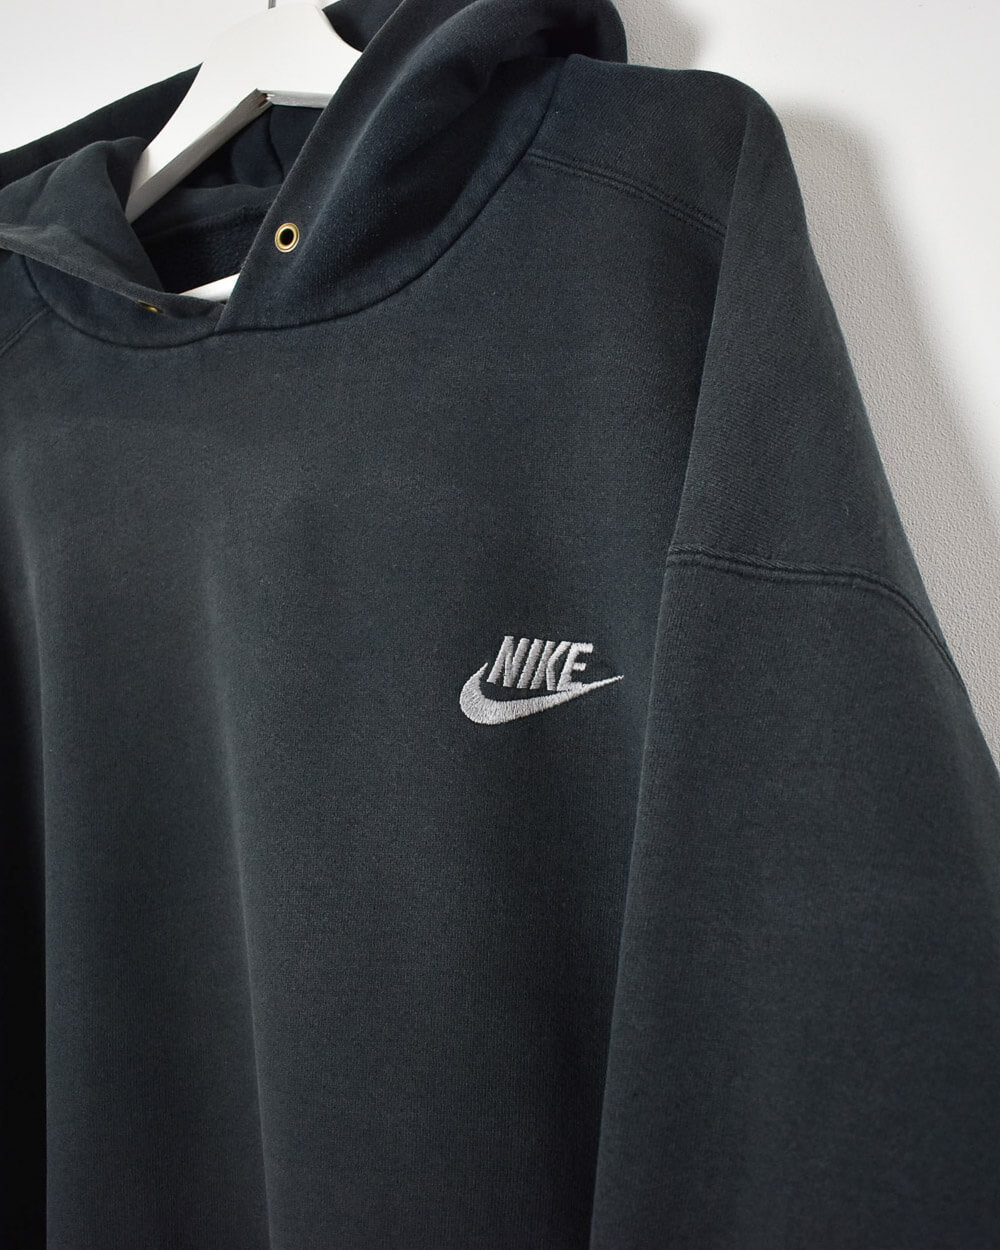 Nike Hoodie - XX-Large - Domno Vintage 90s, 80s, 00s Retro and Vintage Clothing 